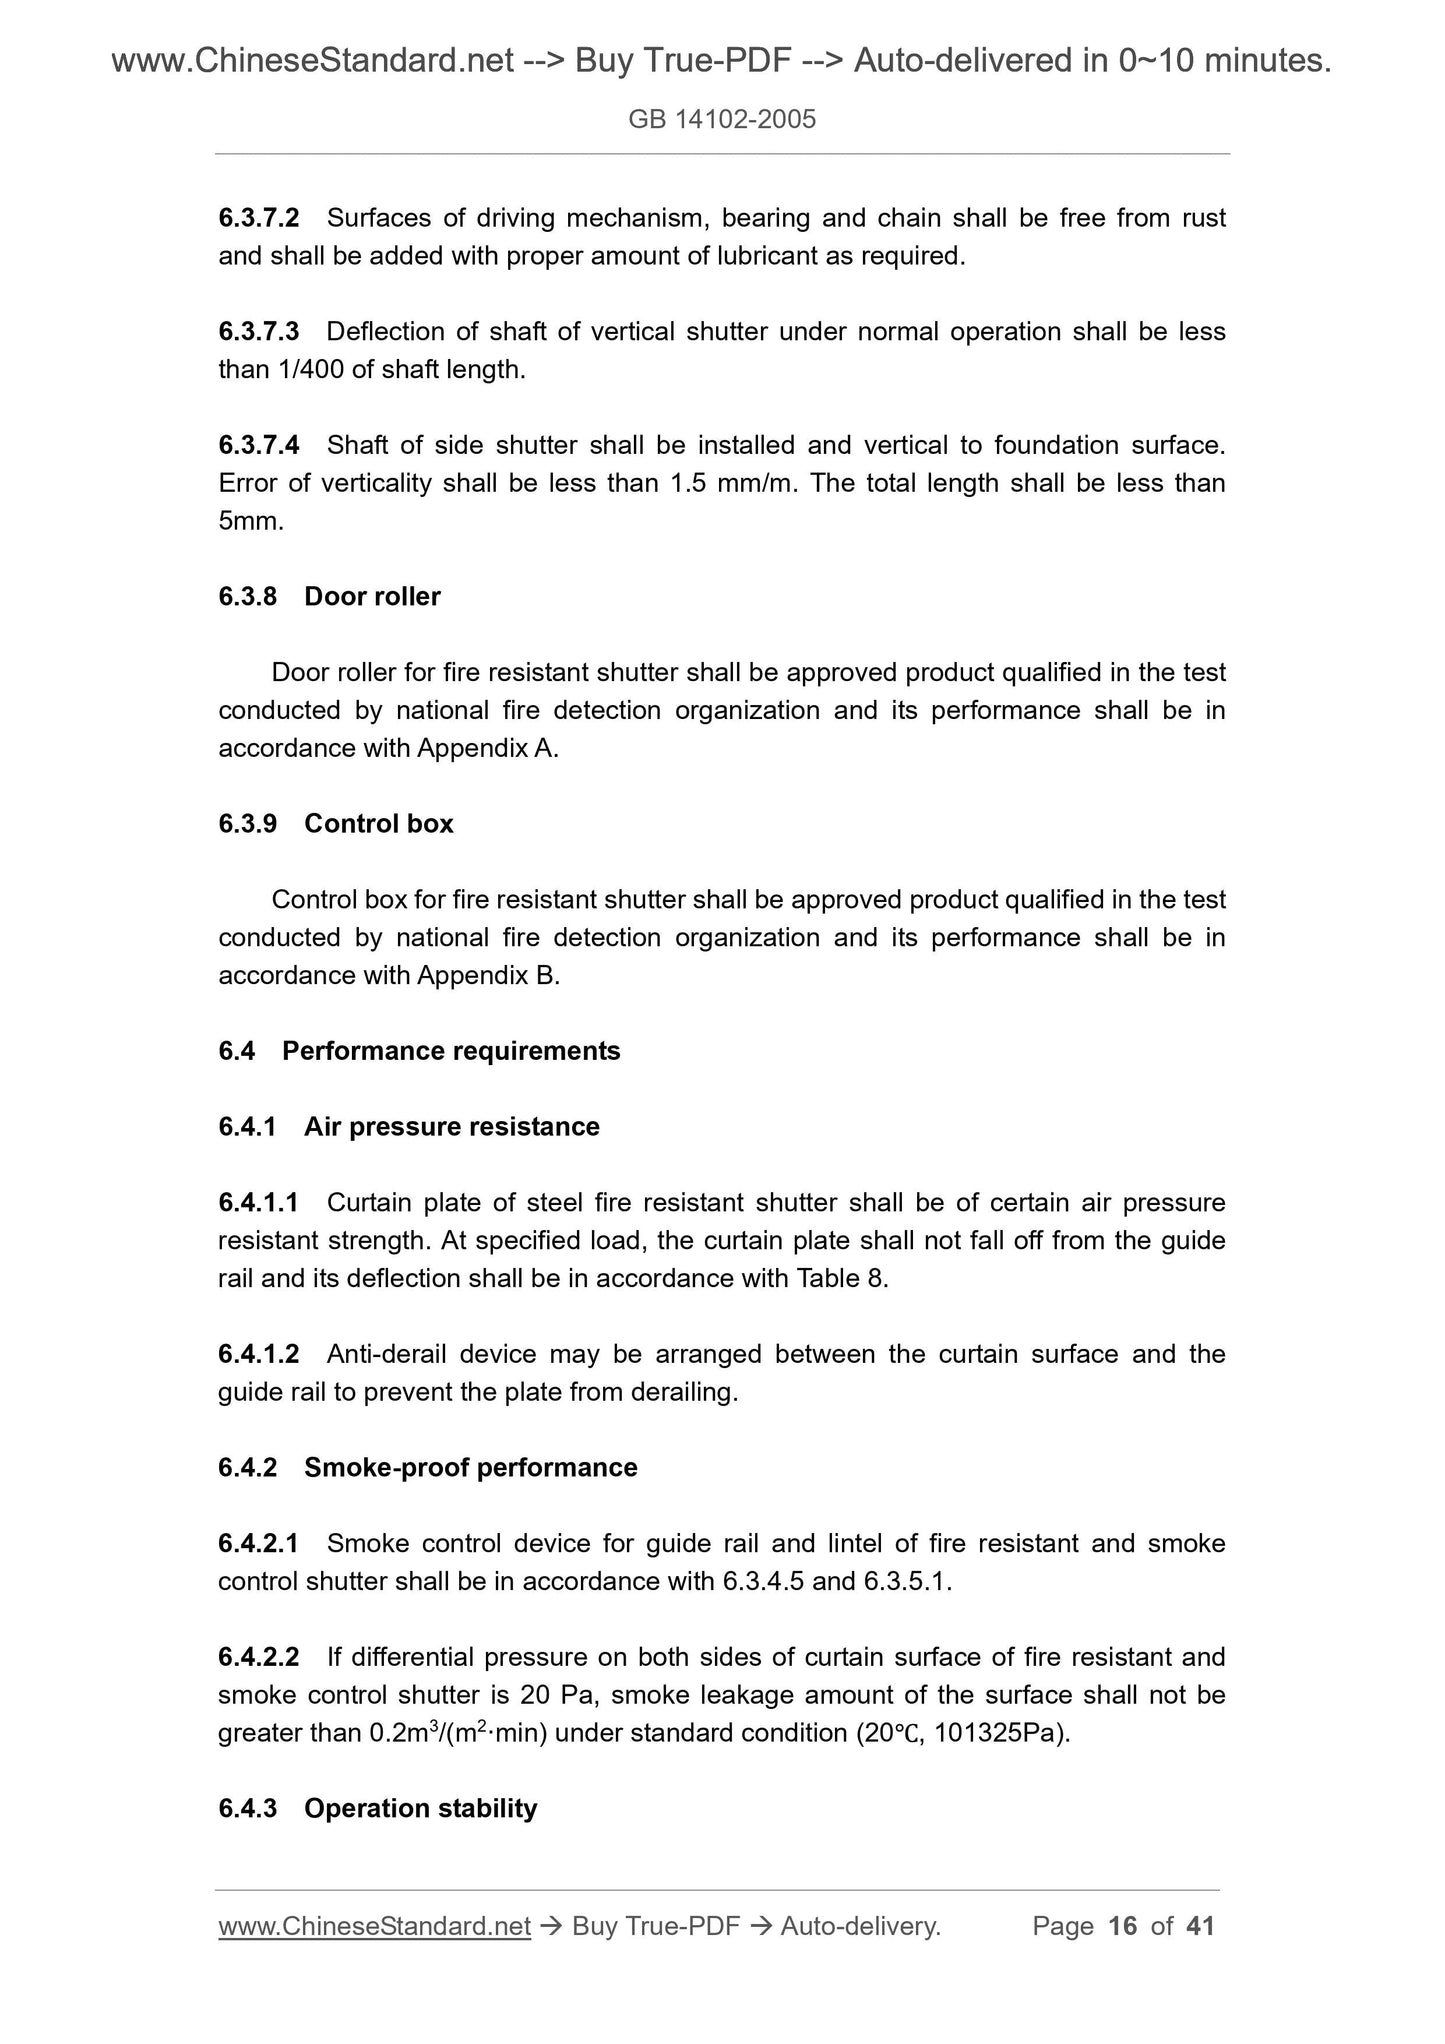 GB 14102-2005 Page 6